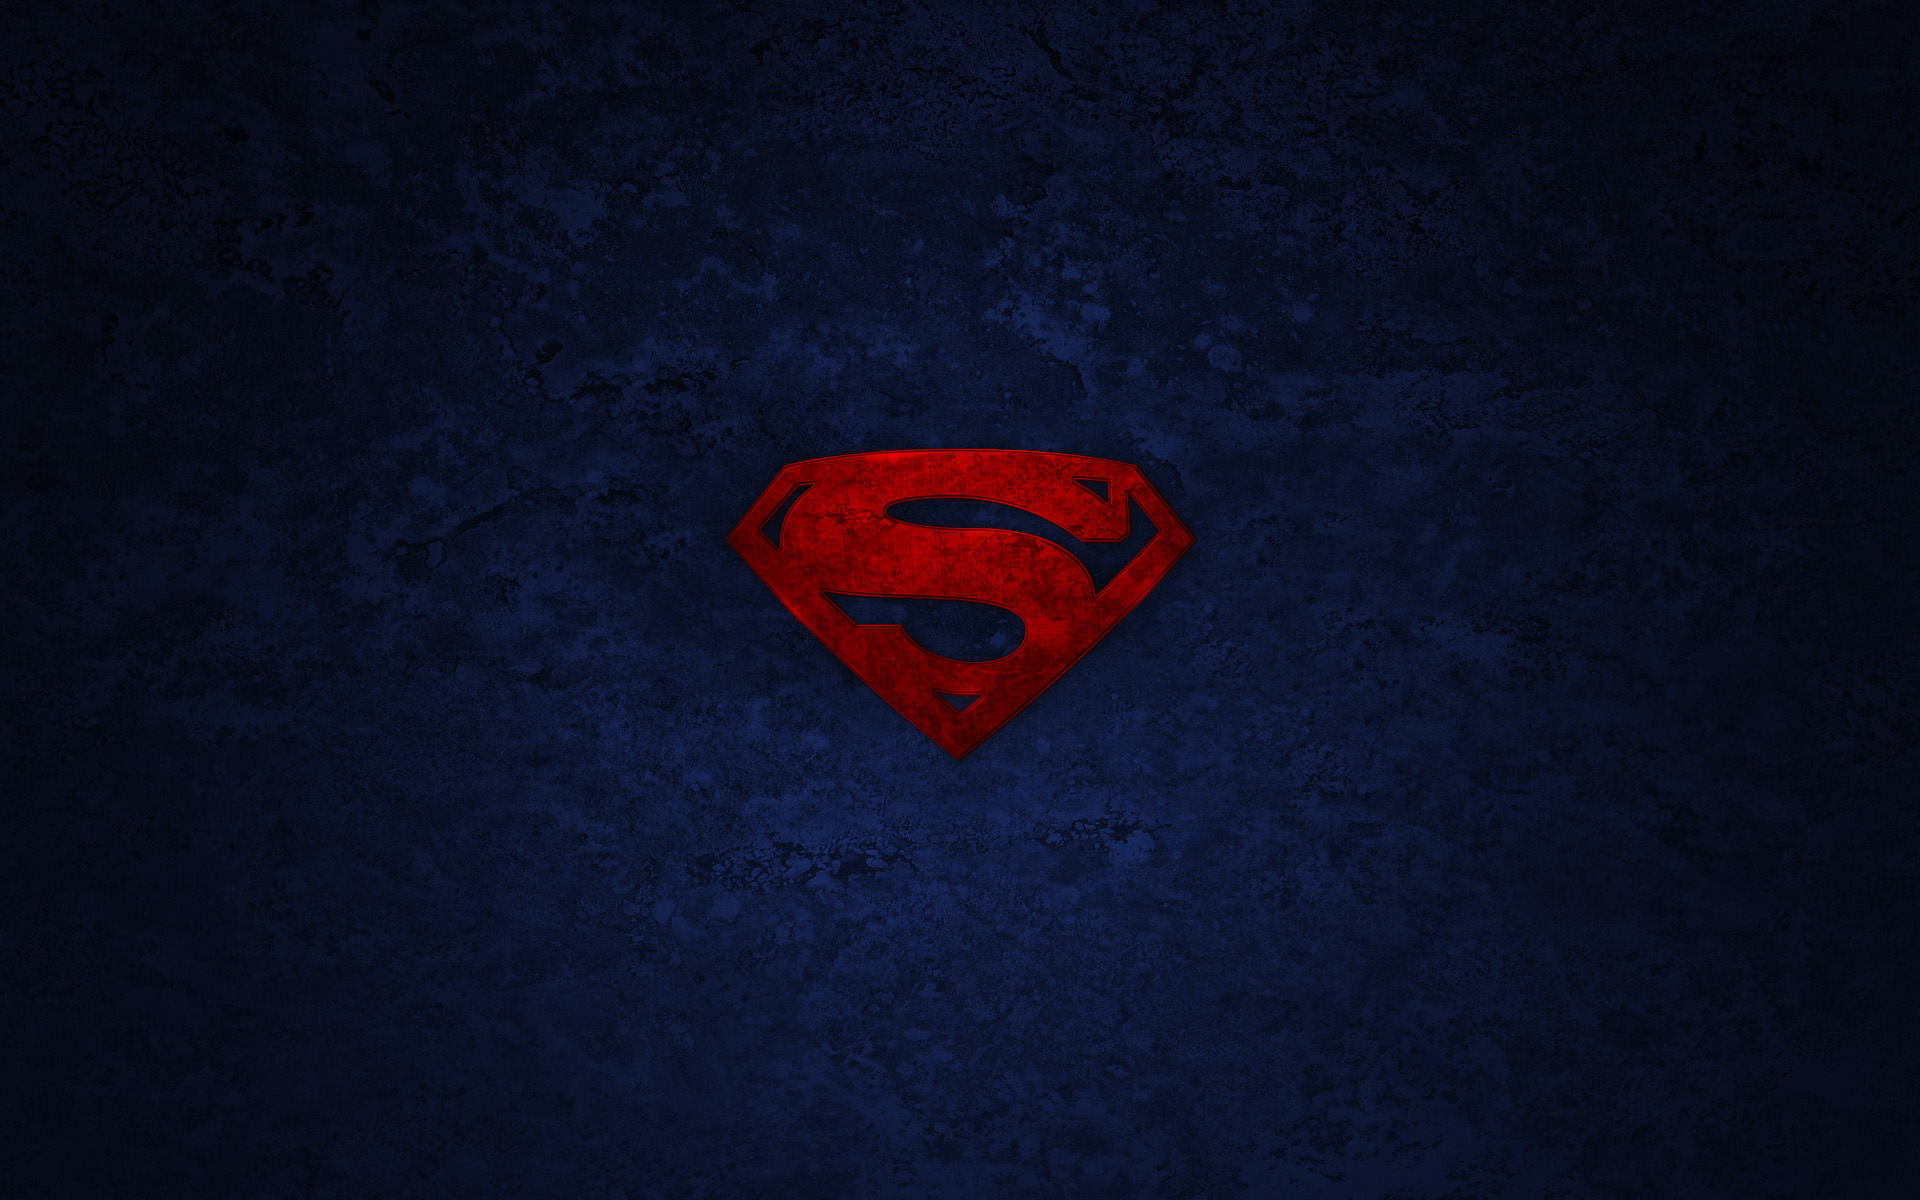 Red Superman logo hd wallpaper background   HD Wallpapers